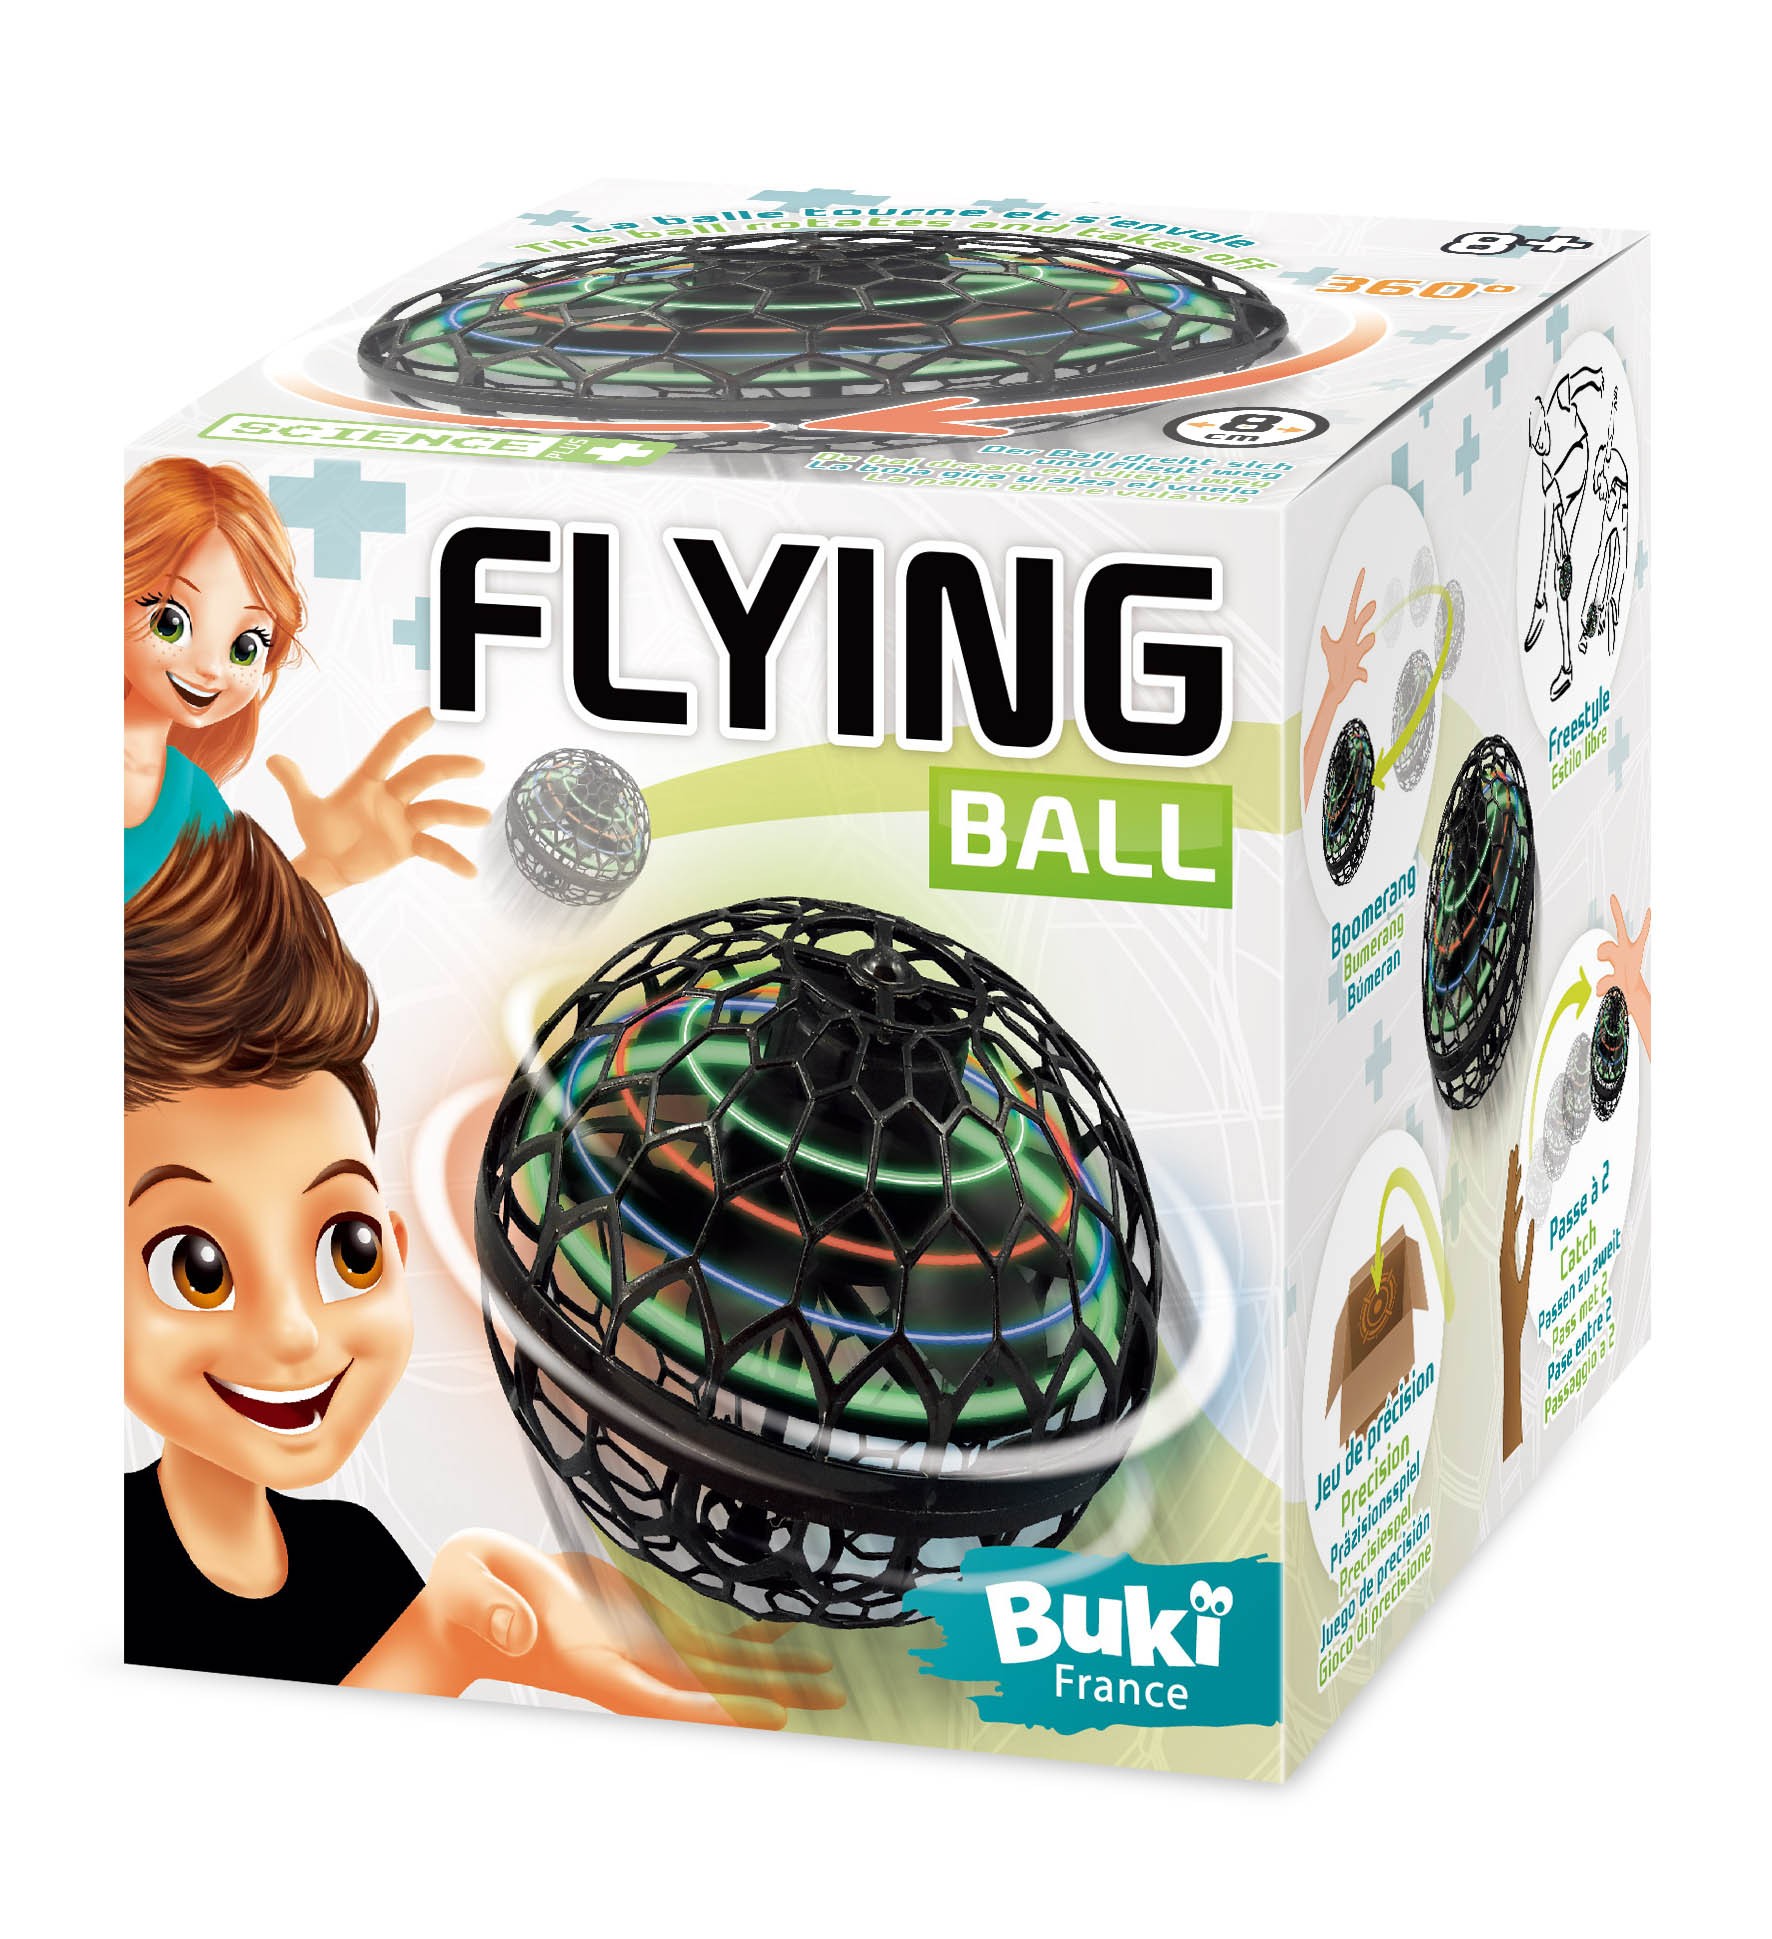 Boule Volante Lumineuse, Jouet Volant Flying Spinner Balle qui